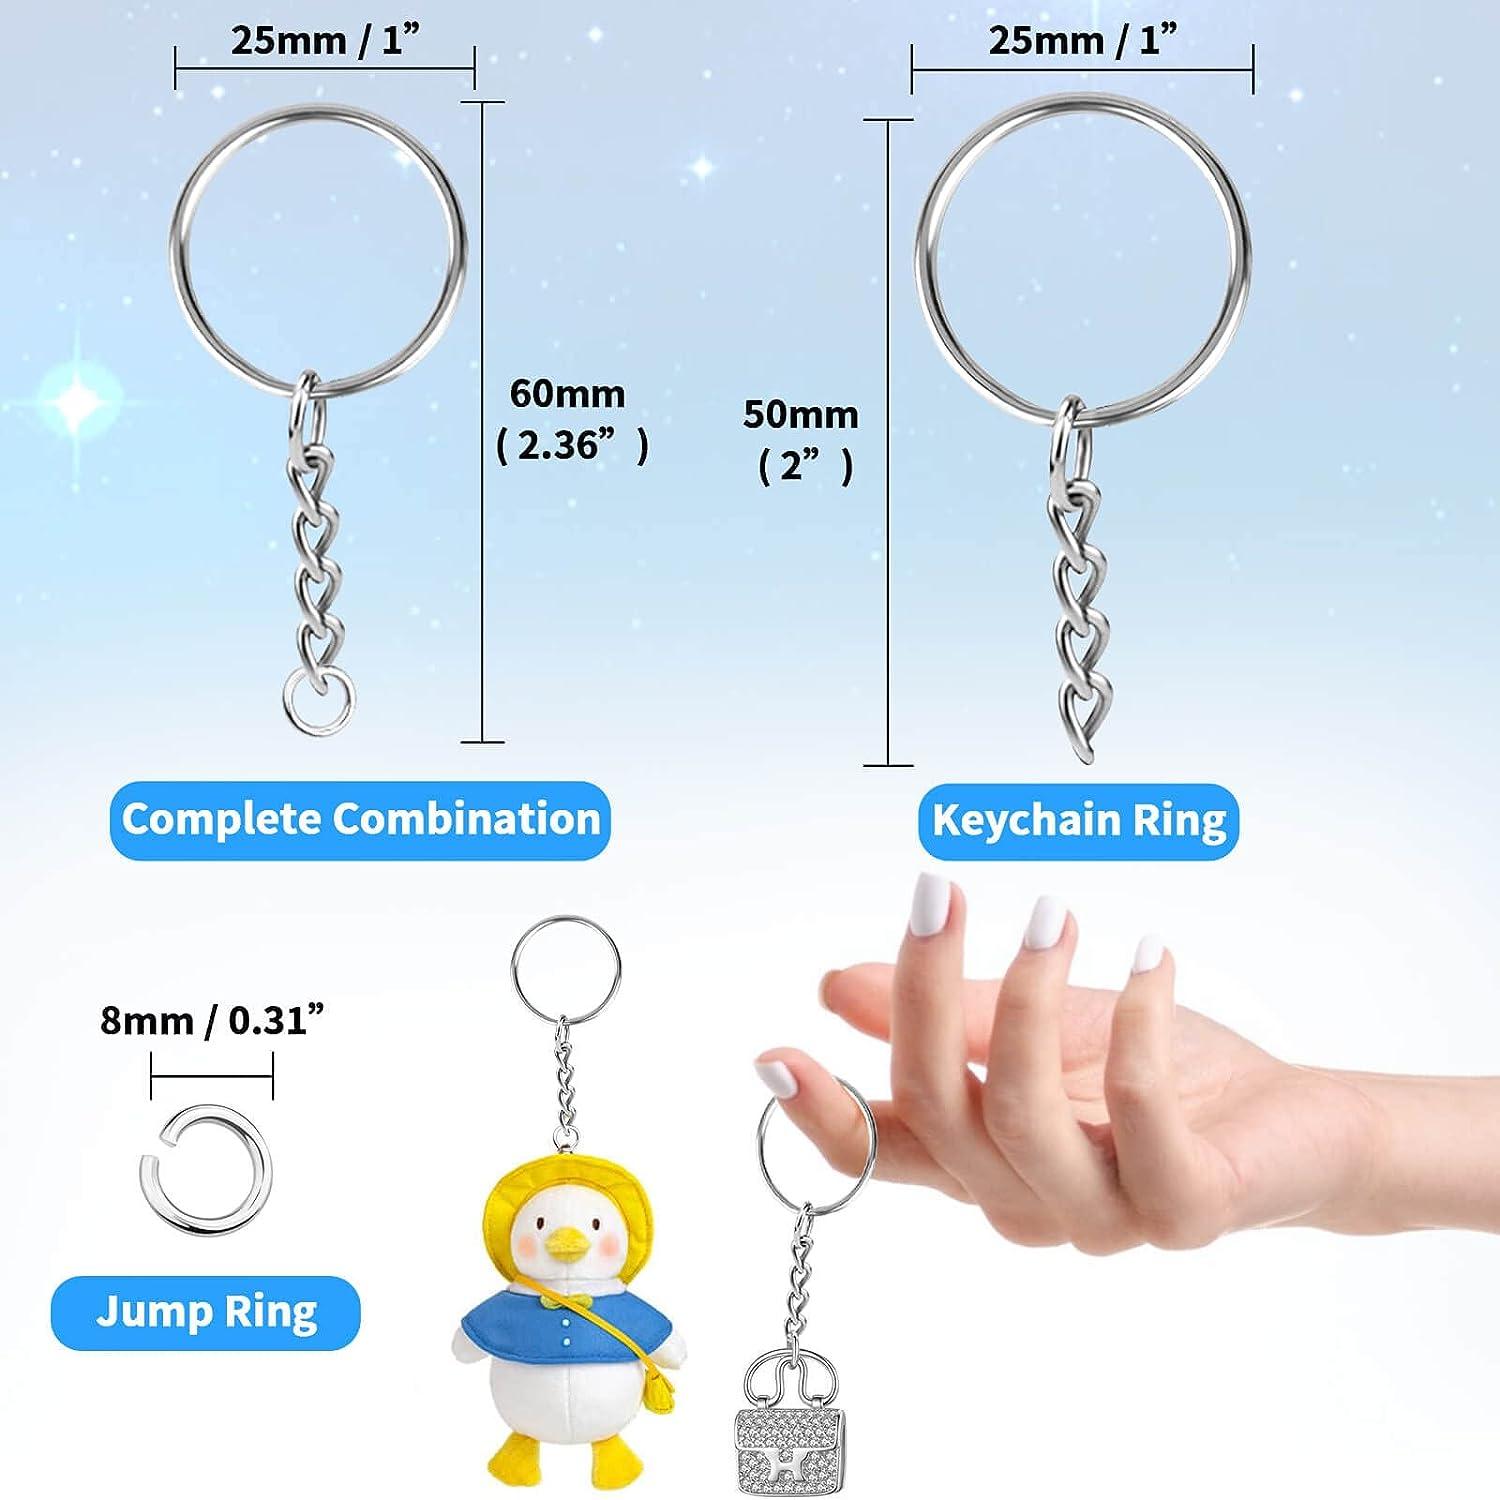 50pcs/set Metal Keychain Rings Parts Key Chains with Open Ring